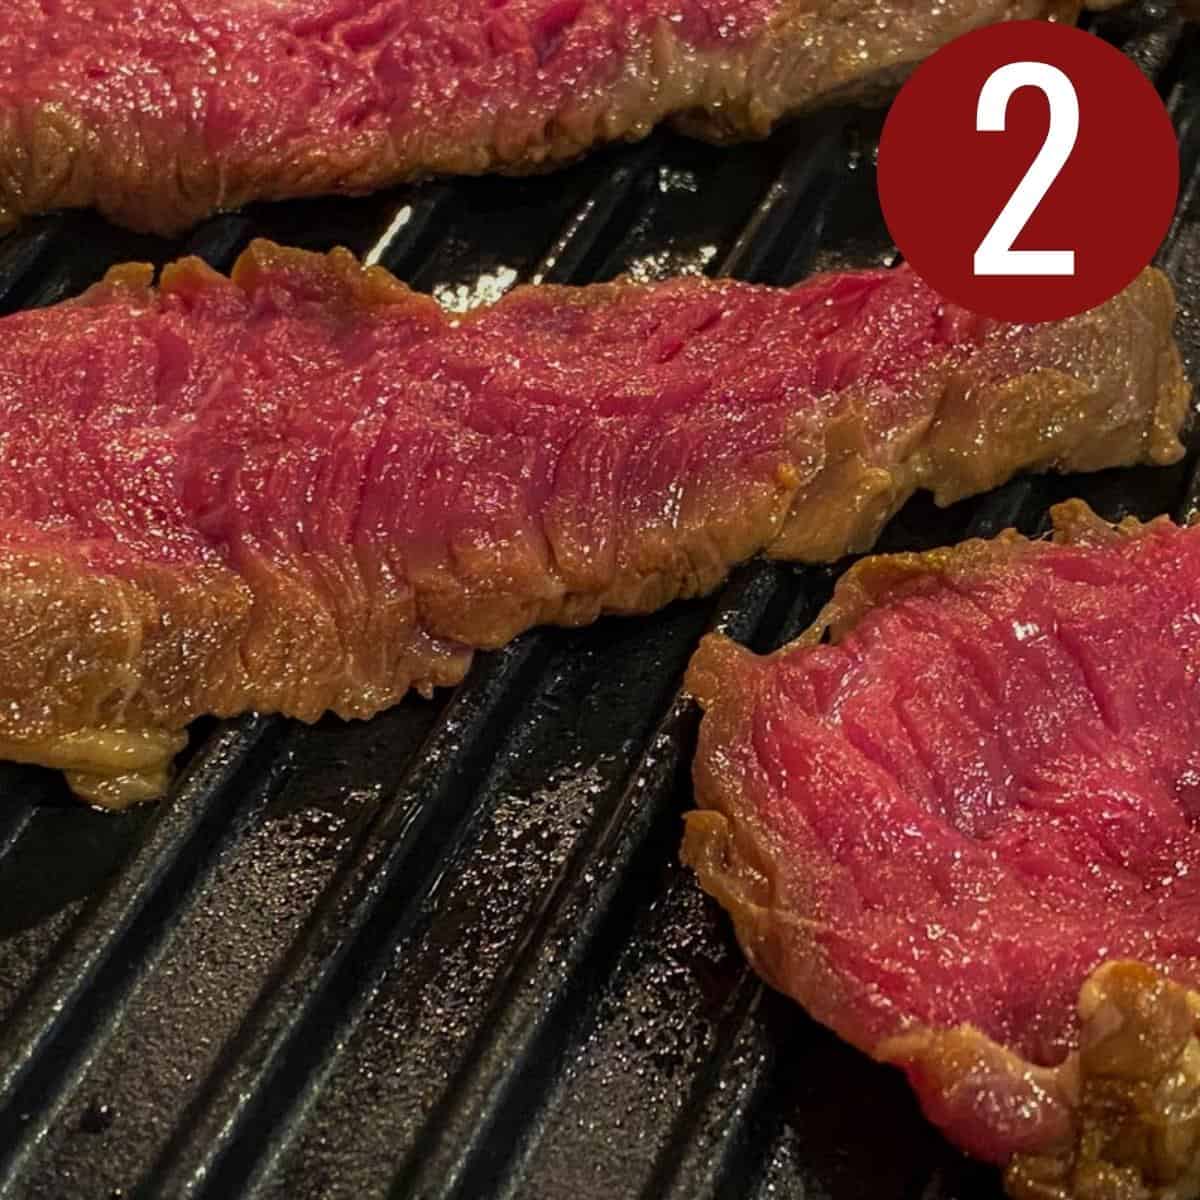 Slices of Filipino beef steak on a griddle.